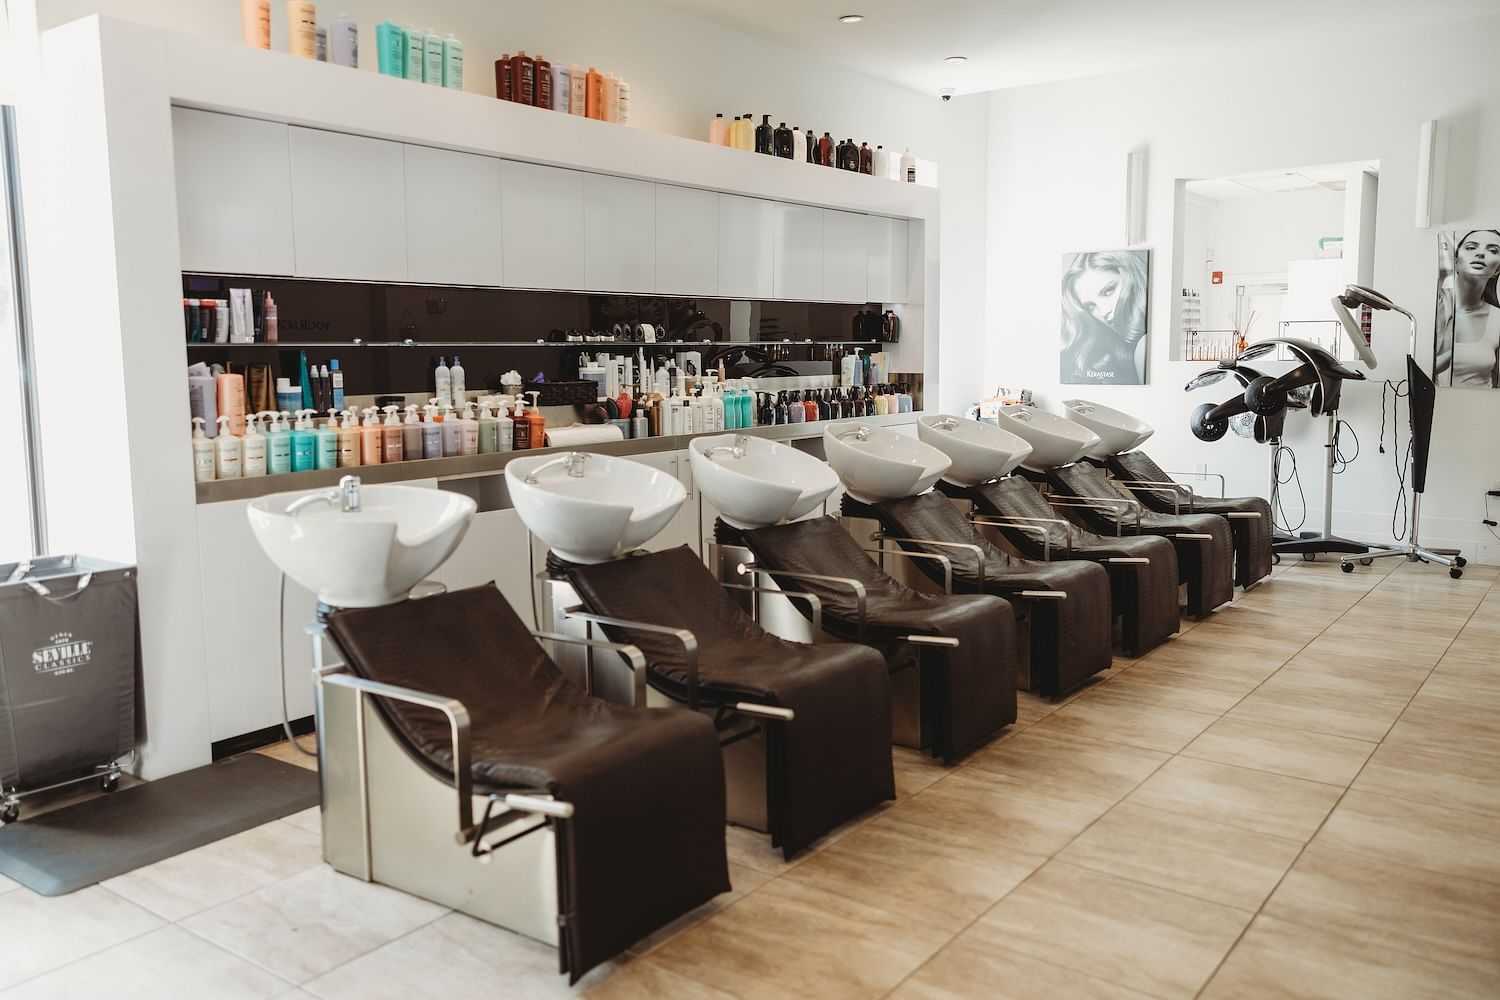 Interior of a hair salon with washing stations and product shelves.